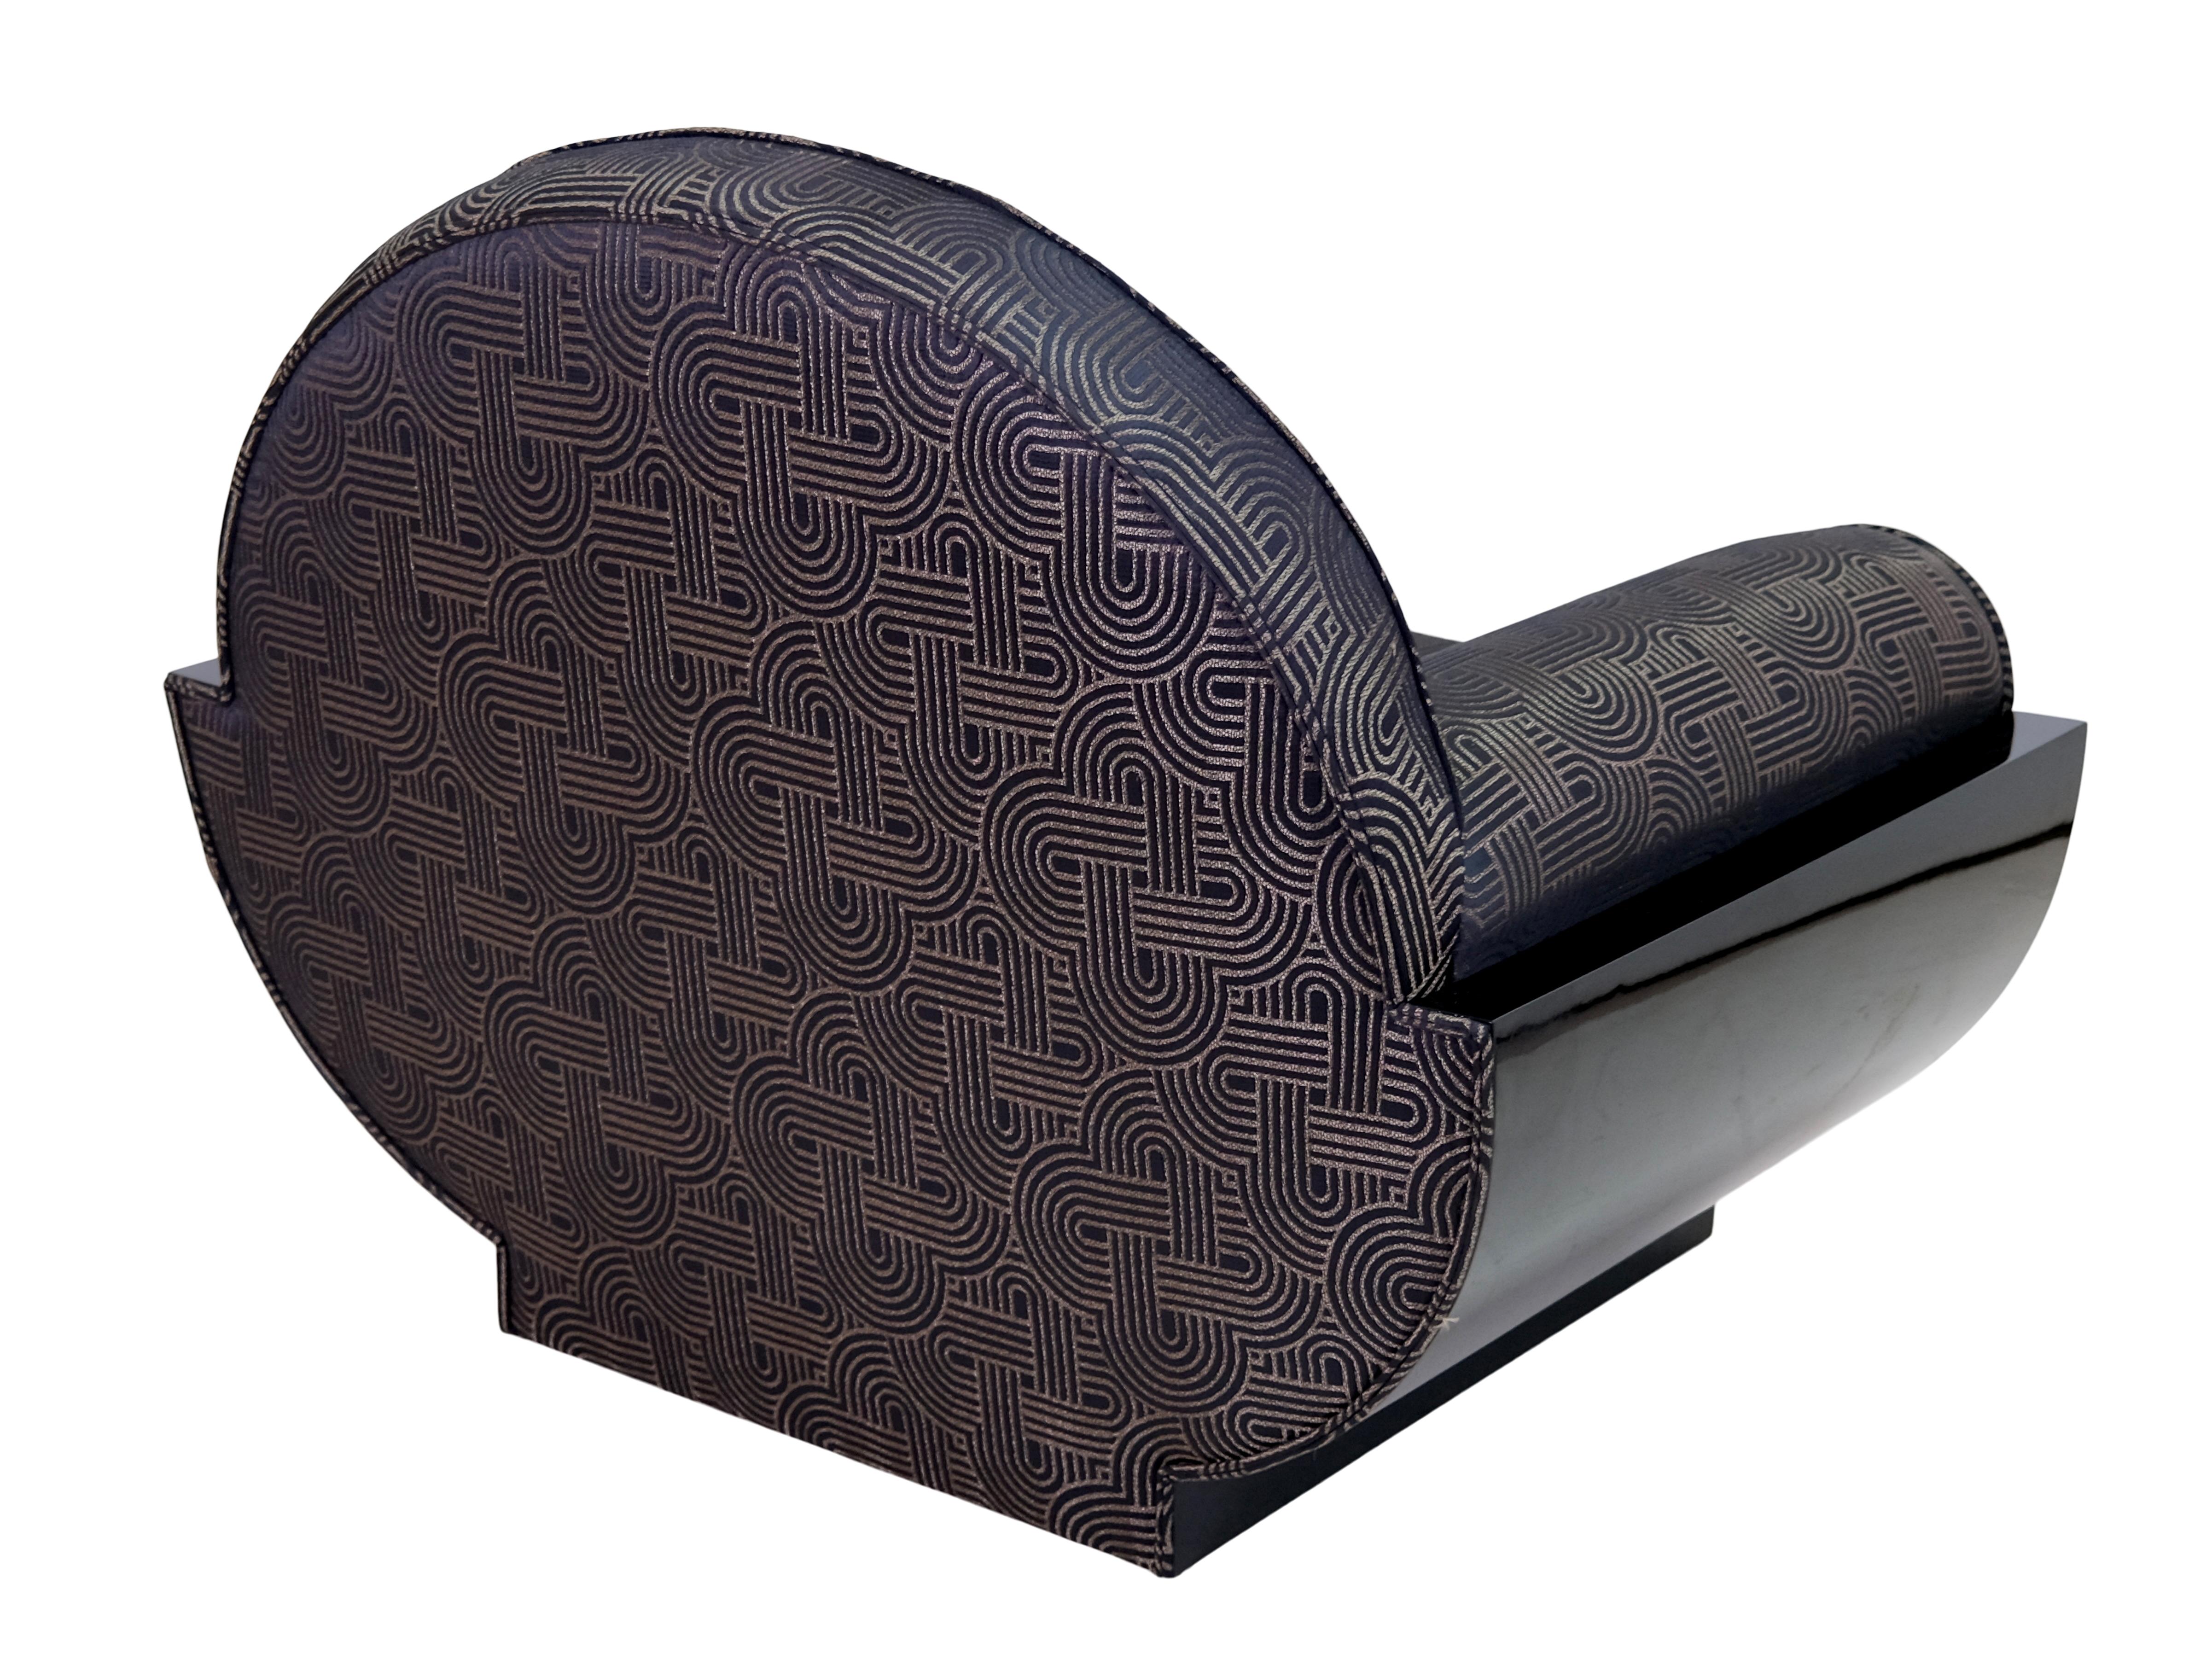 Blackened Set of 2 Roundish Art Deco Club Chairs in Black Lacquer with Art Deco Pattern For Sale